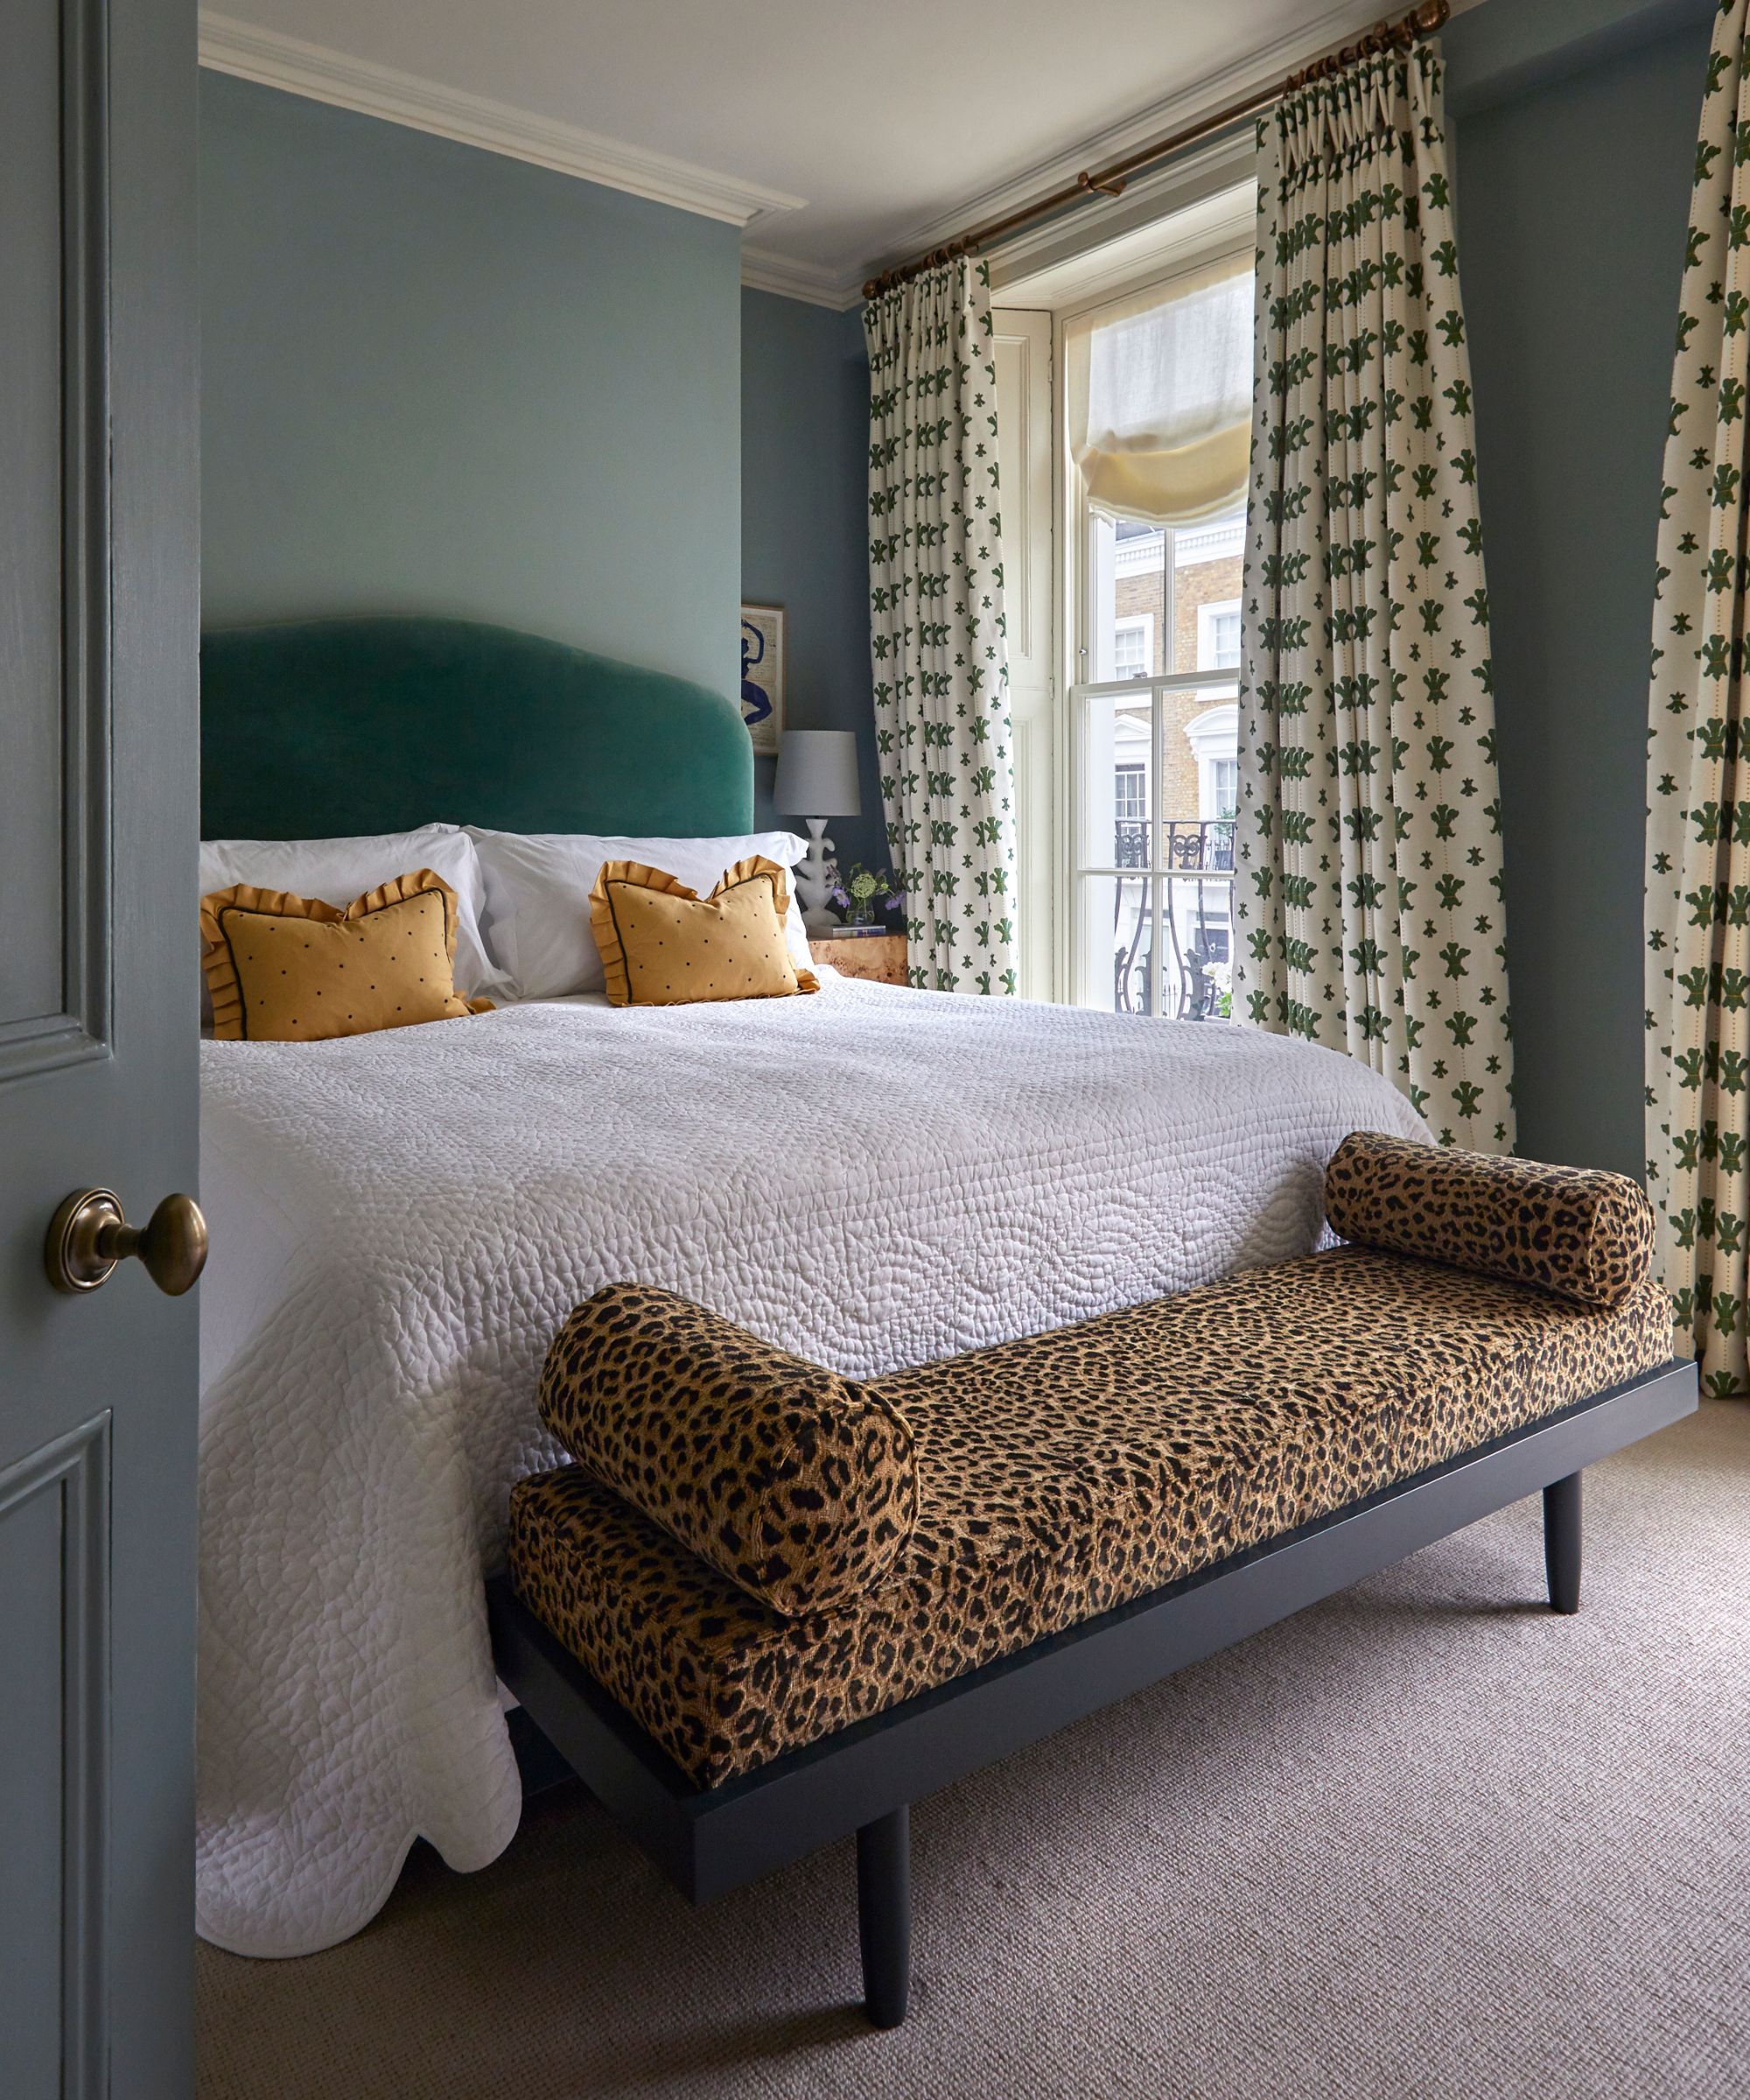 green bedroom with large green velvet headboard and  a leopard print upholstered ottoman at the foot of the bed